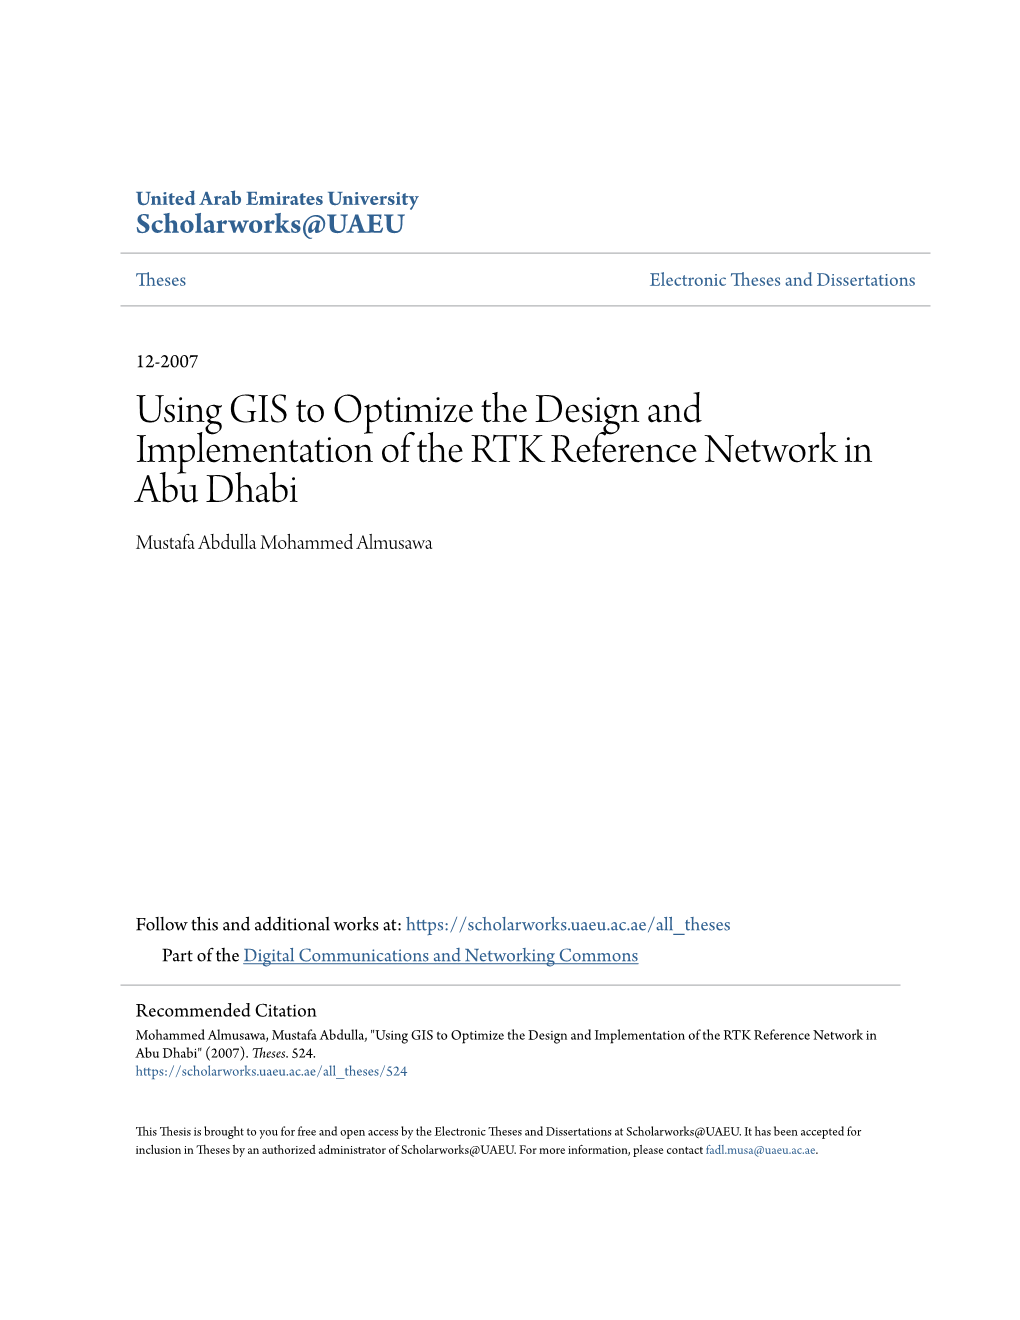 Using GIS to Optimize the Design and Implementation of the RTK Reference Network in Abu Dhabi Mustafa Abdulla Mohammed Almusawa